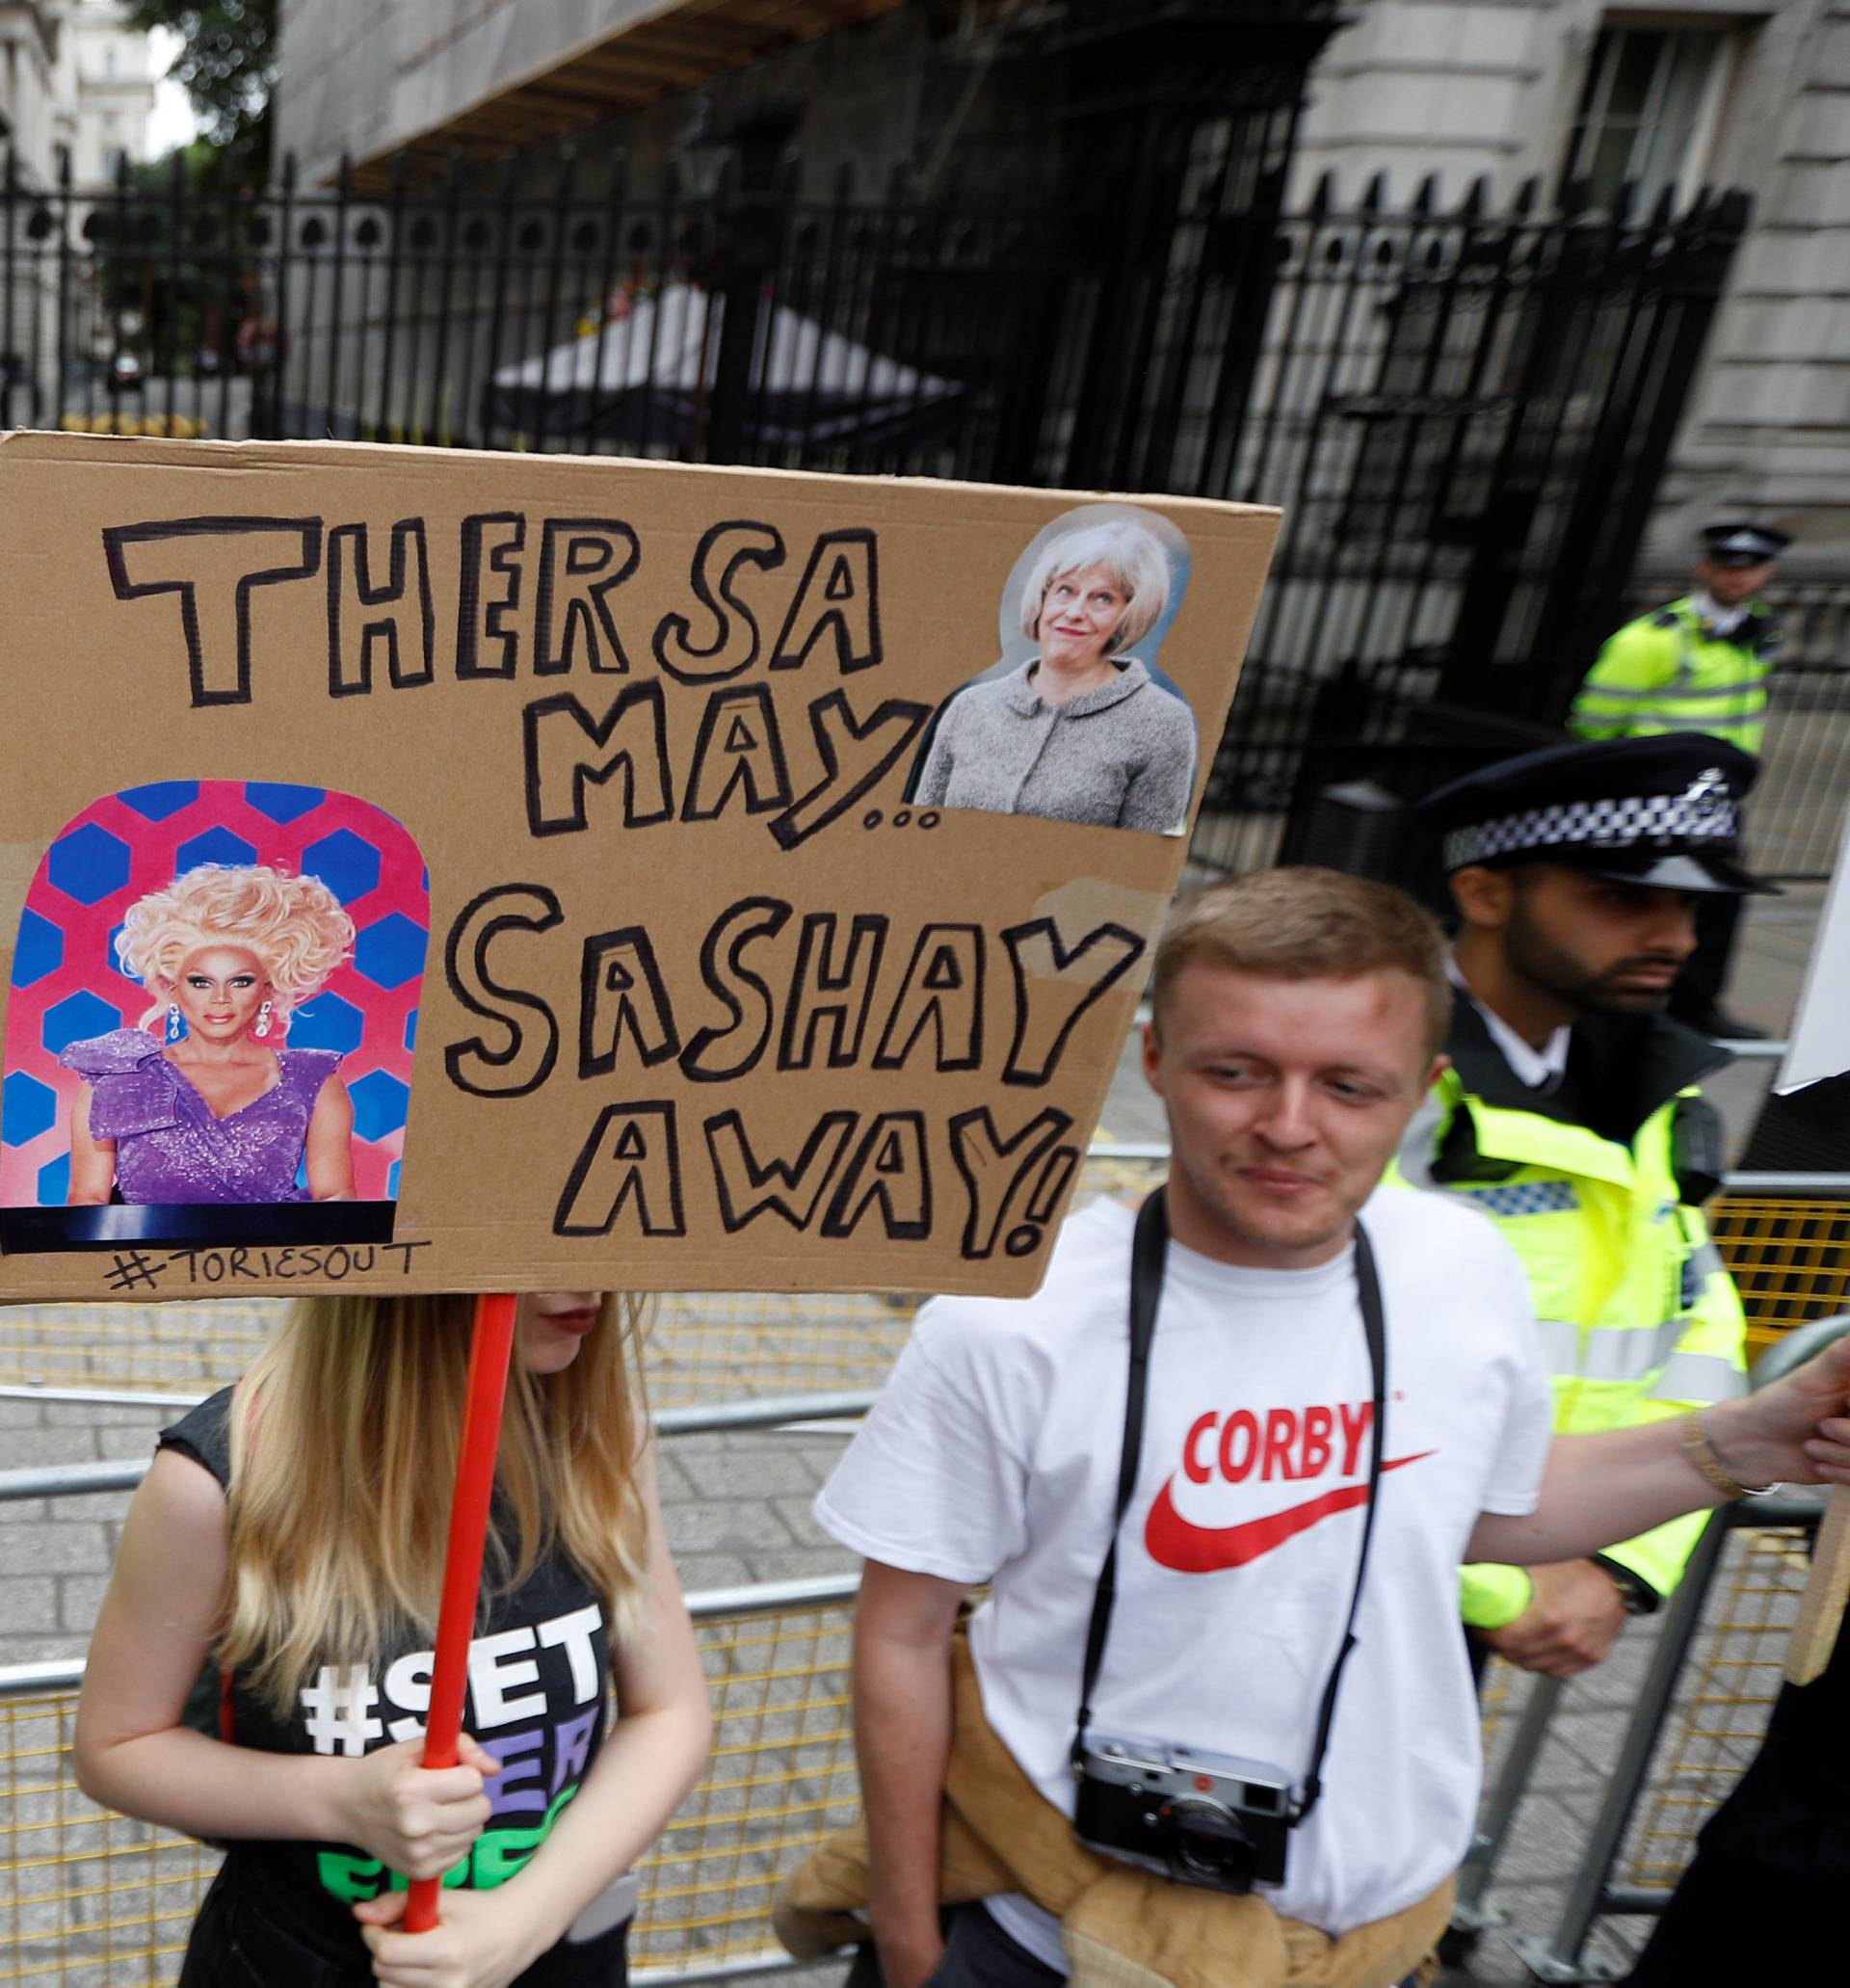 Demonstrators stand at the end of Downing Street during an anti-austerity rally and march organised by campaigners Peoples' Assembly, in central London